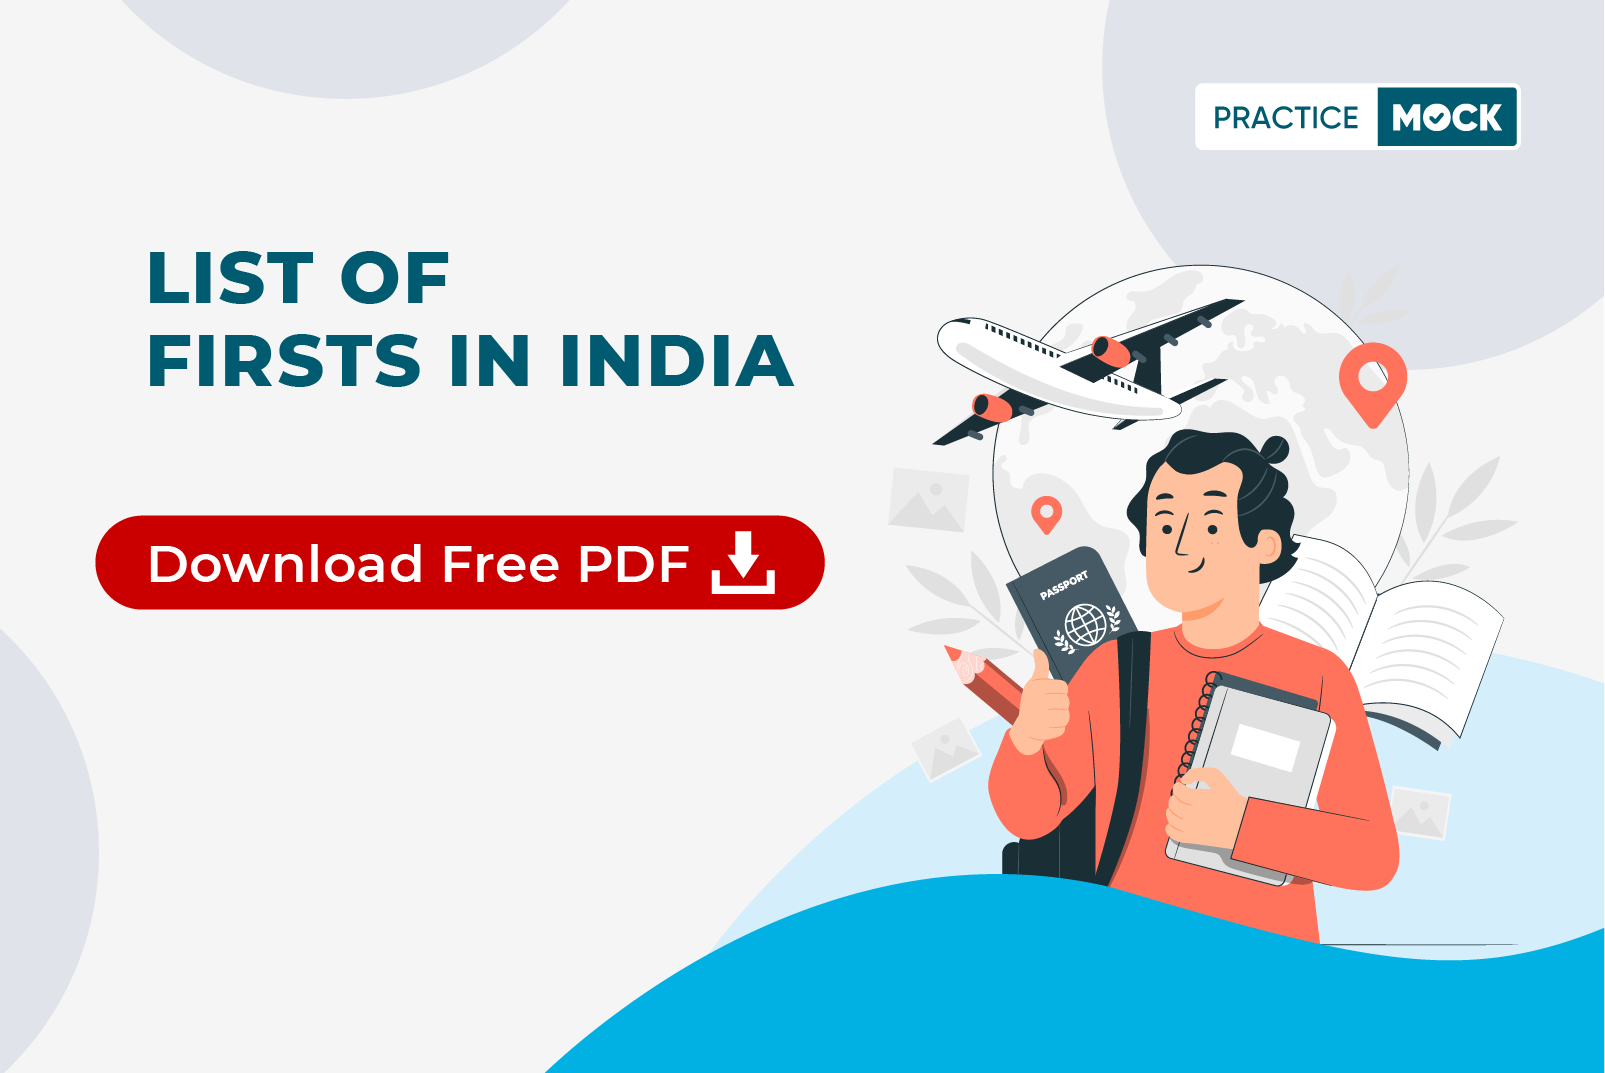 List of Firsts in India- Download Free PDF - PracticeMock